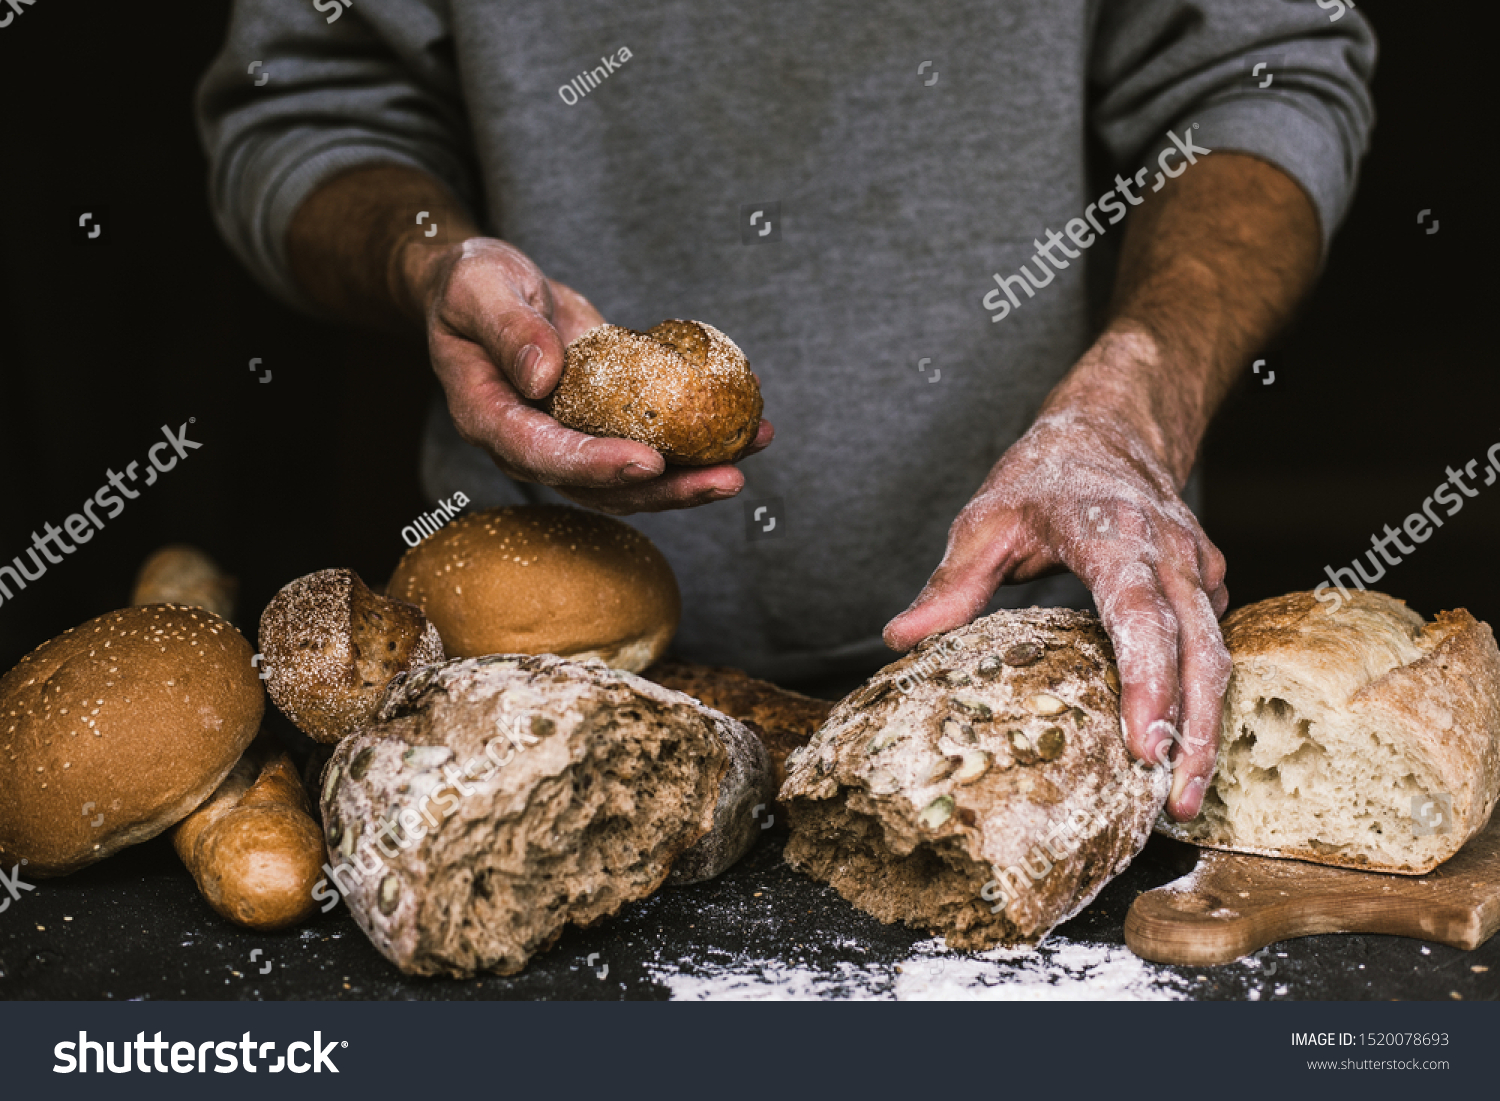 Baker man holding a rustic organic loaf of bread in his hands #1520078693